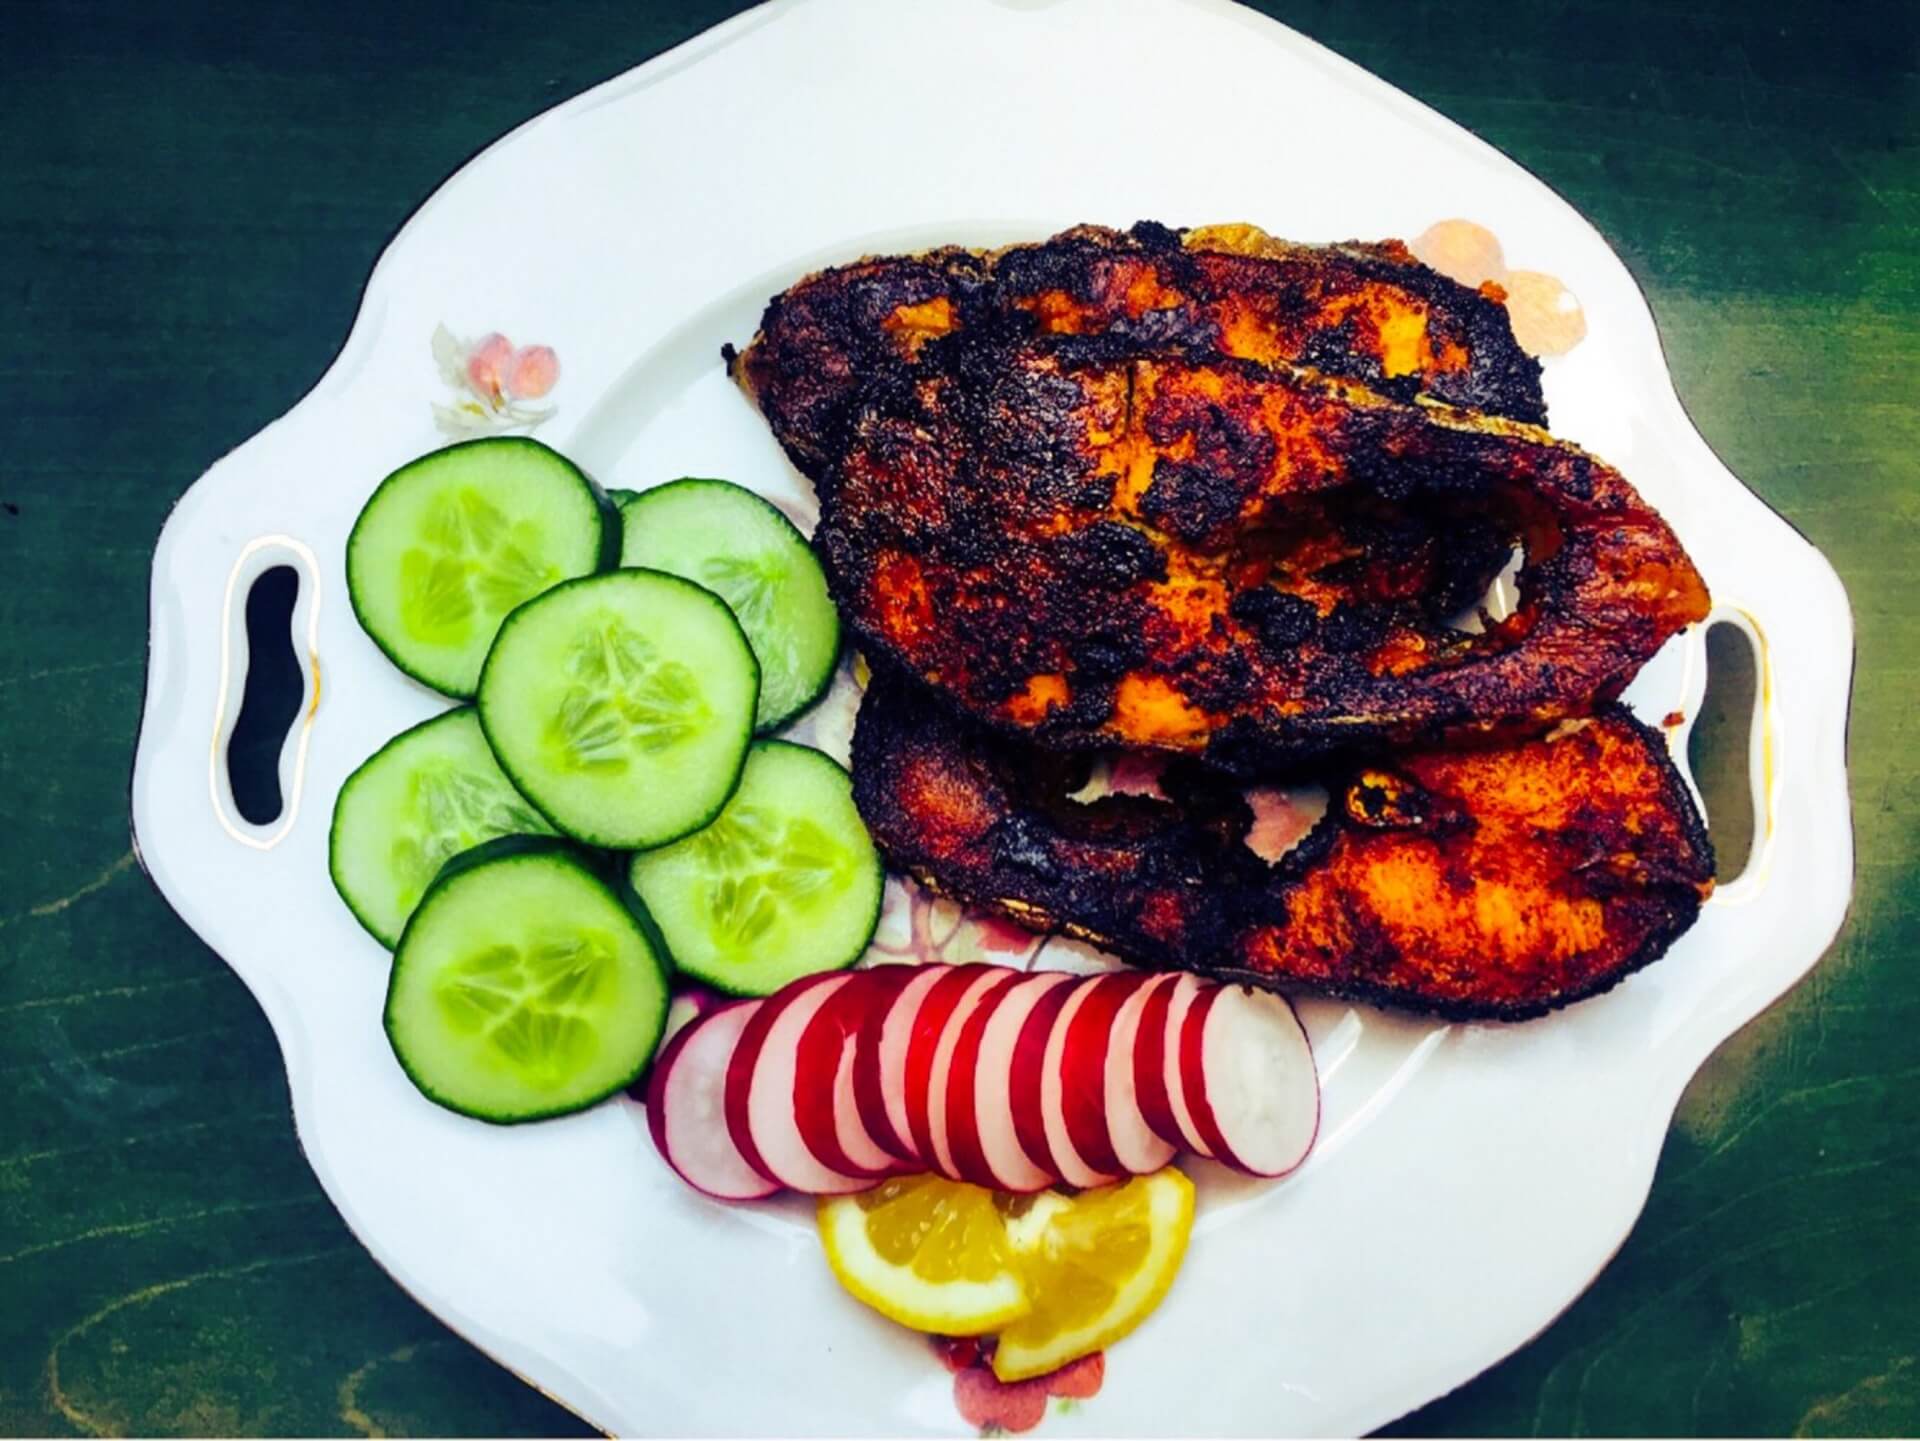 Spicy shallow fried fish steaks